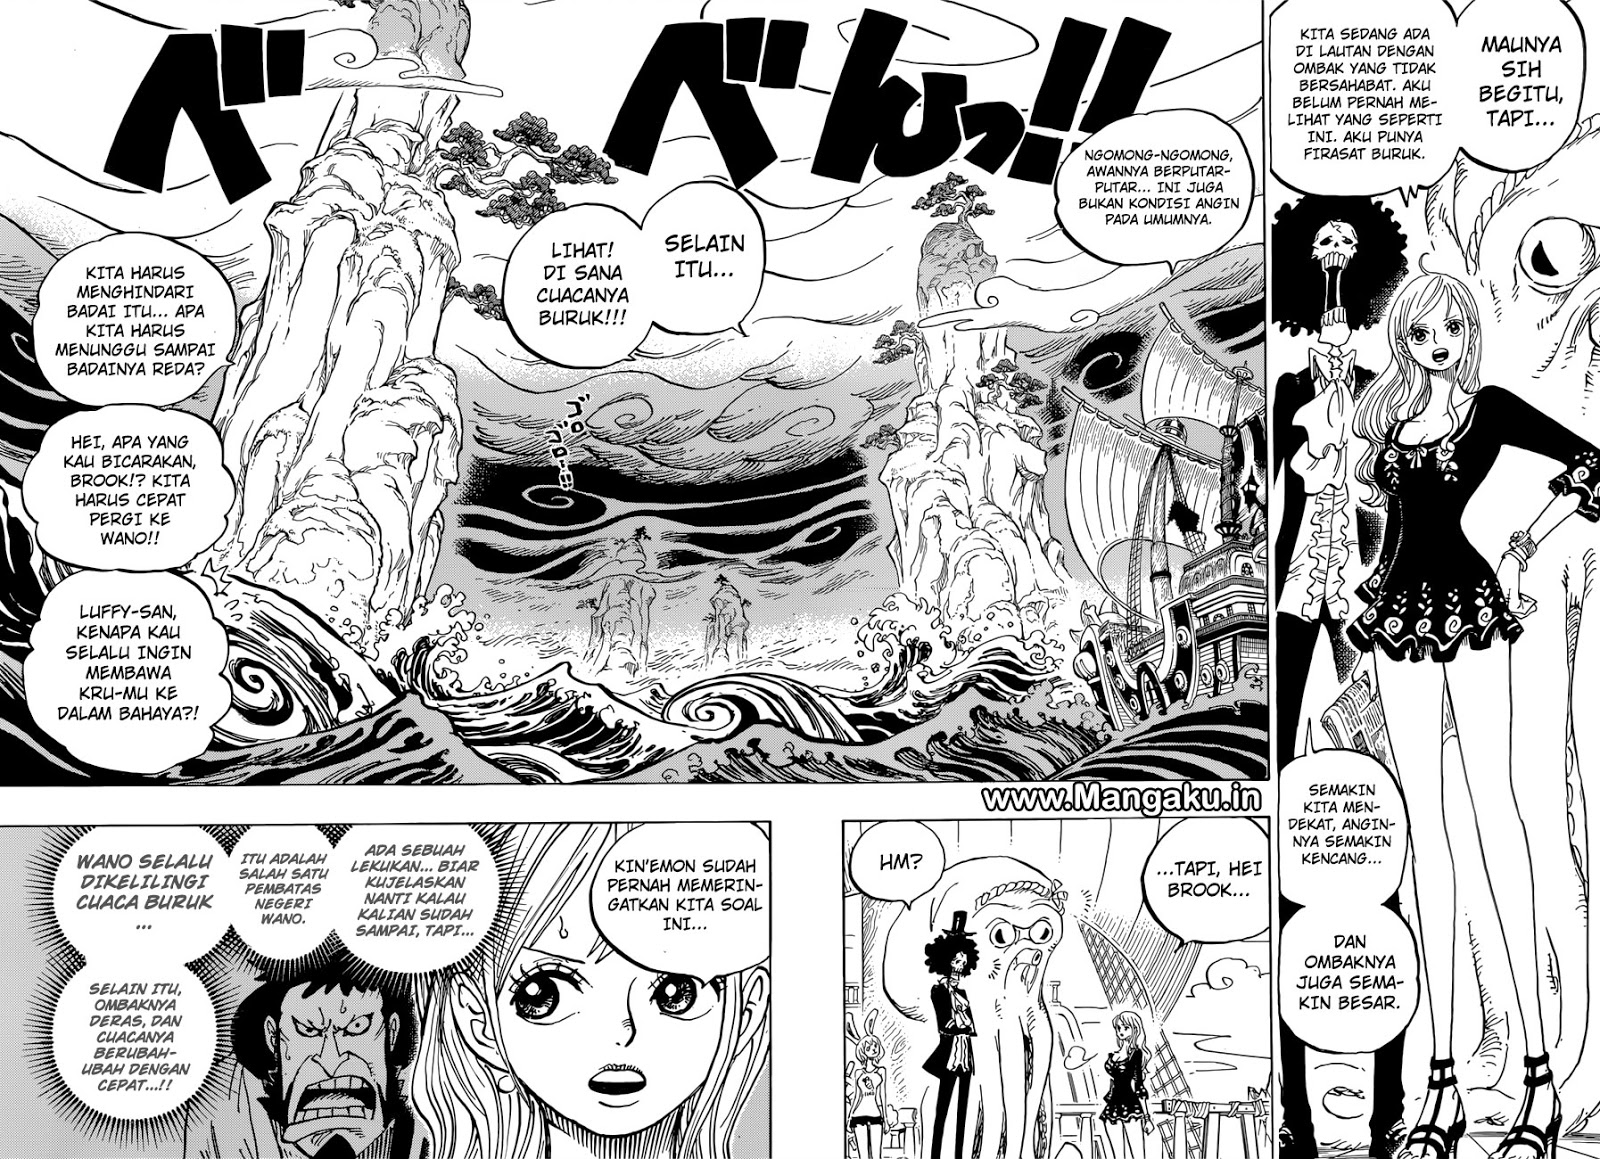 One Piece Chapter 910